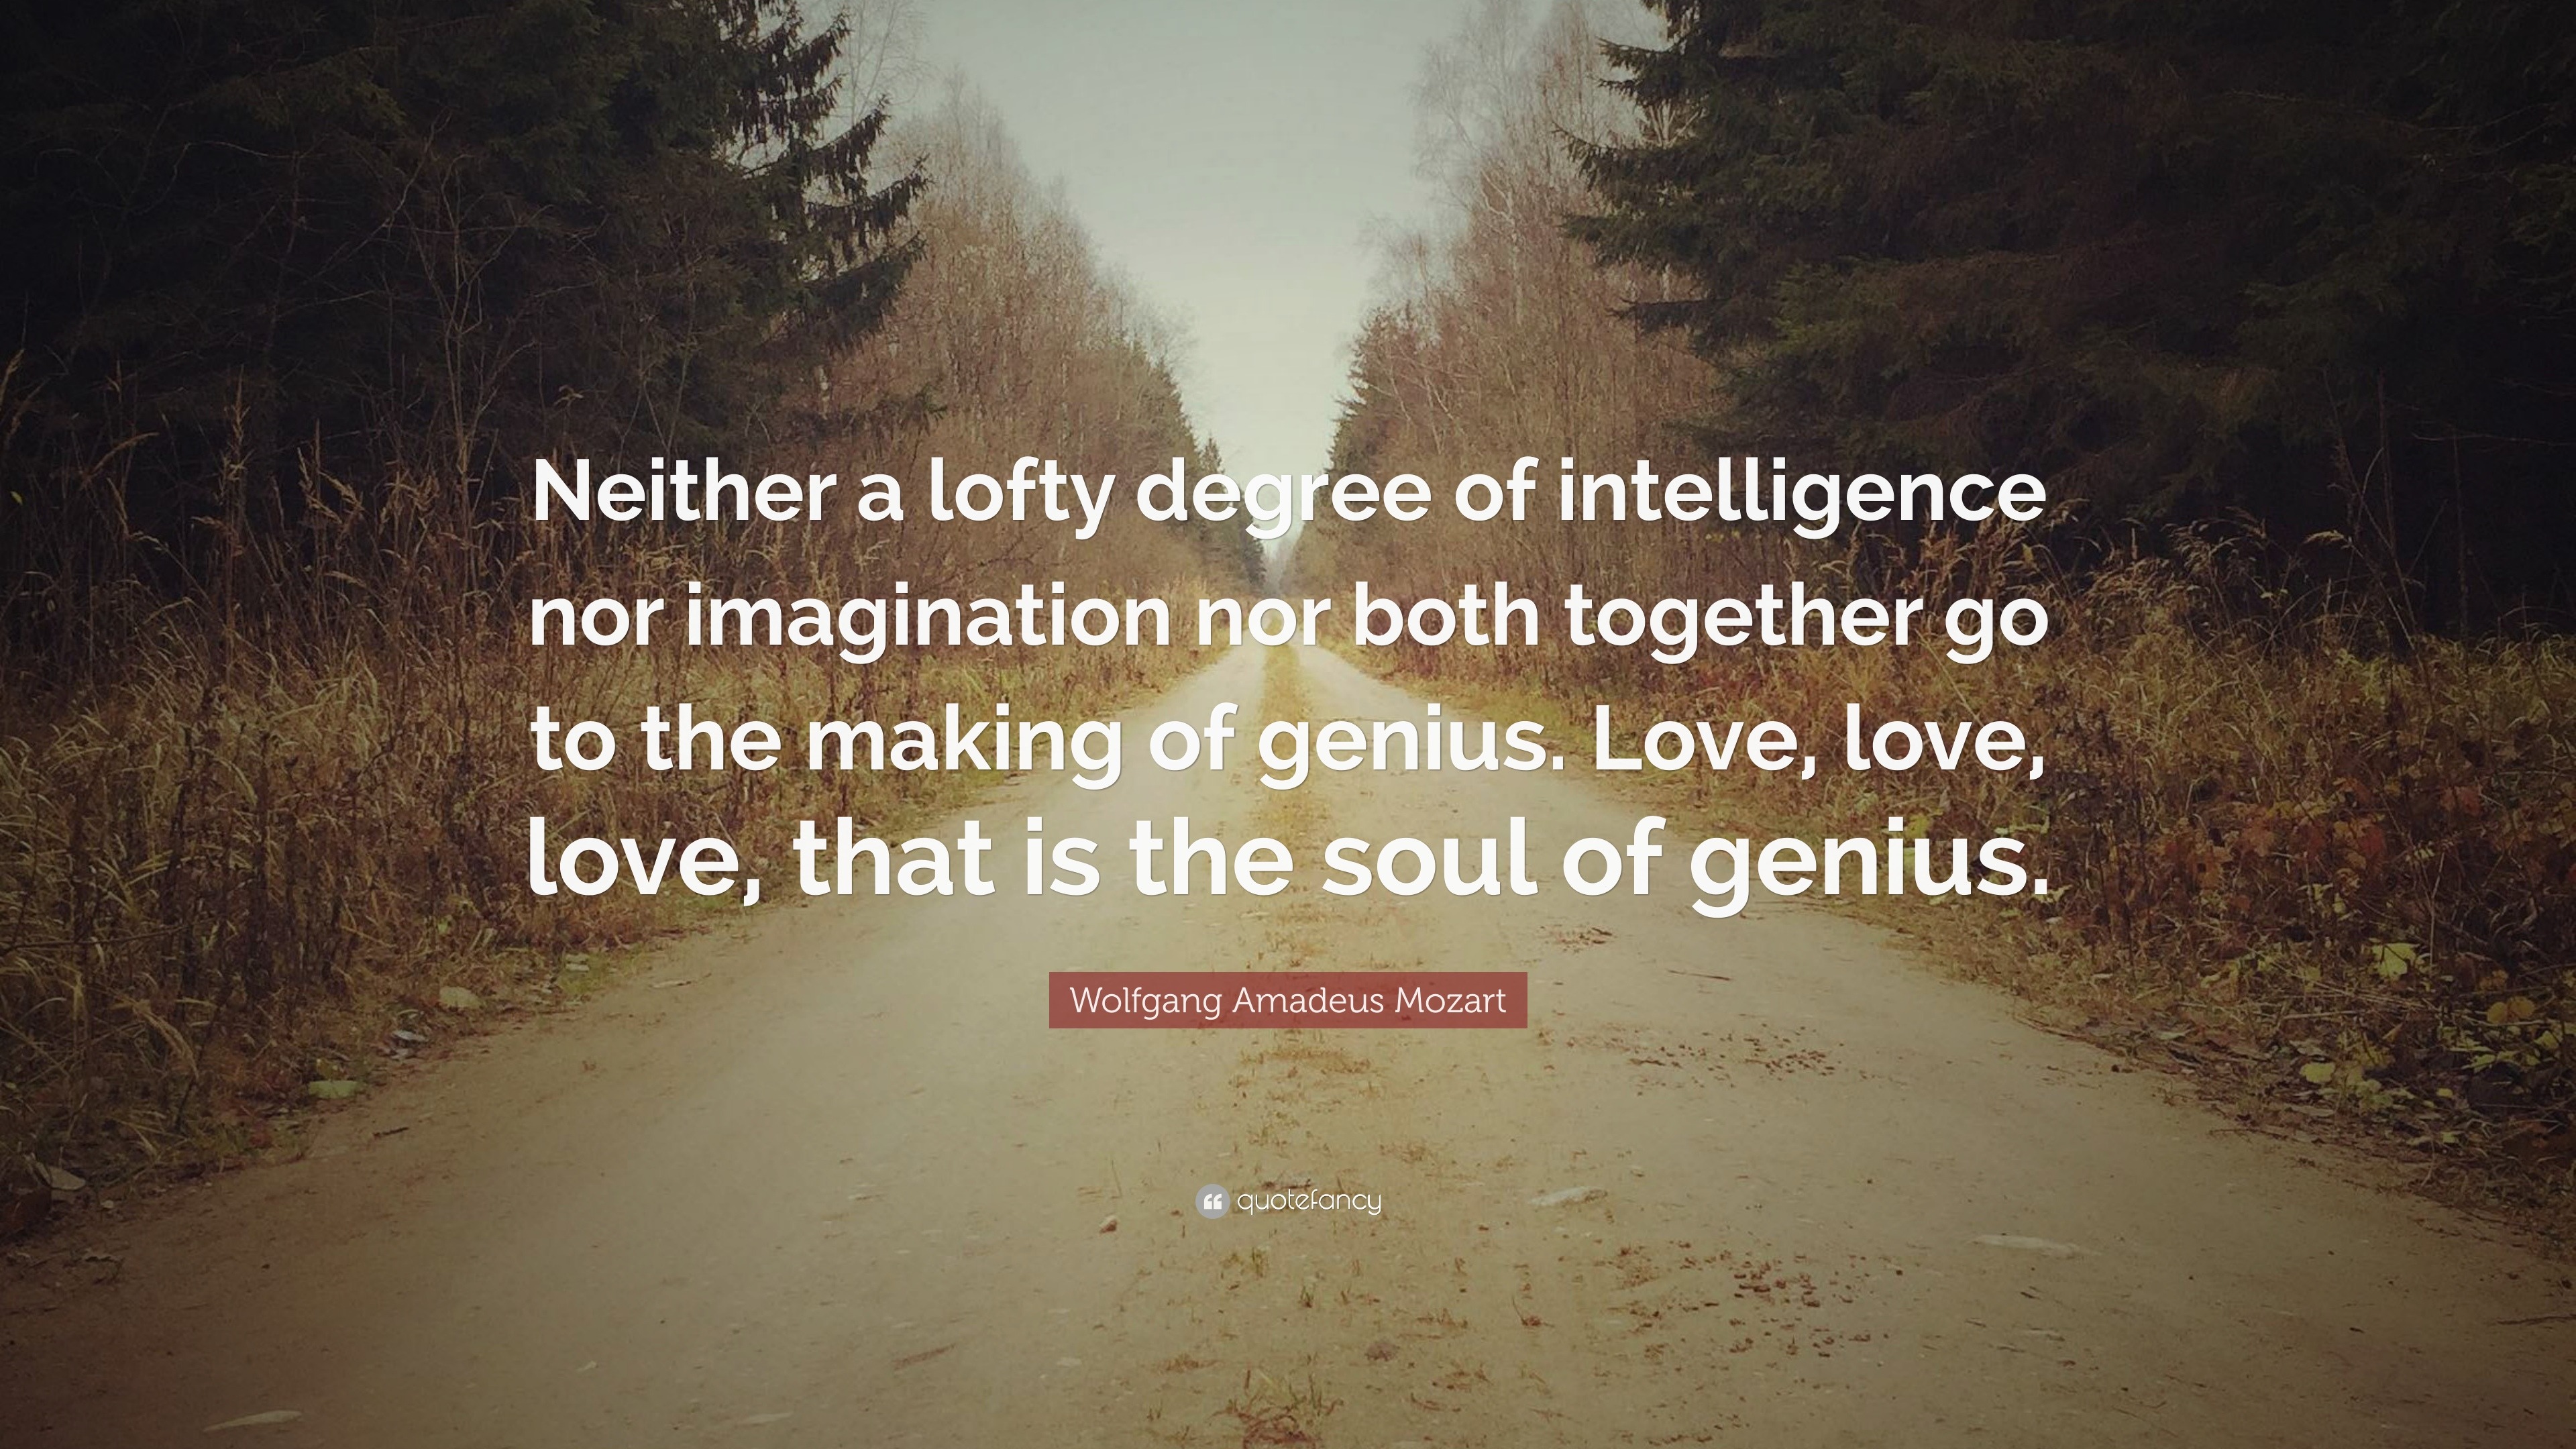 Mozart Quotes On Love / Wolfgang Amadeus Mozart Quote: &amp;quot;Neither a lofty ...